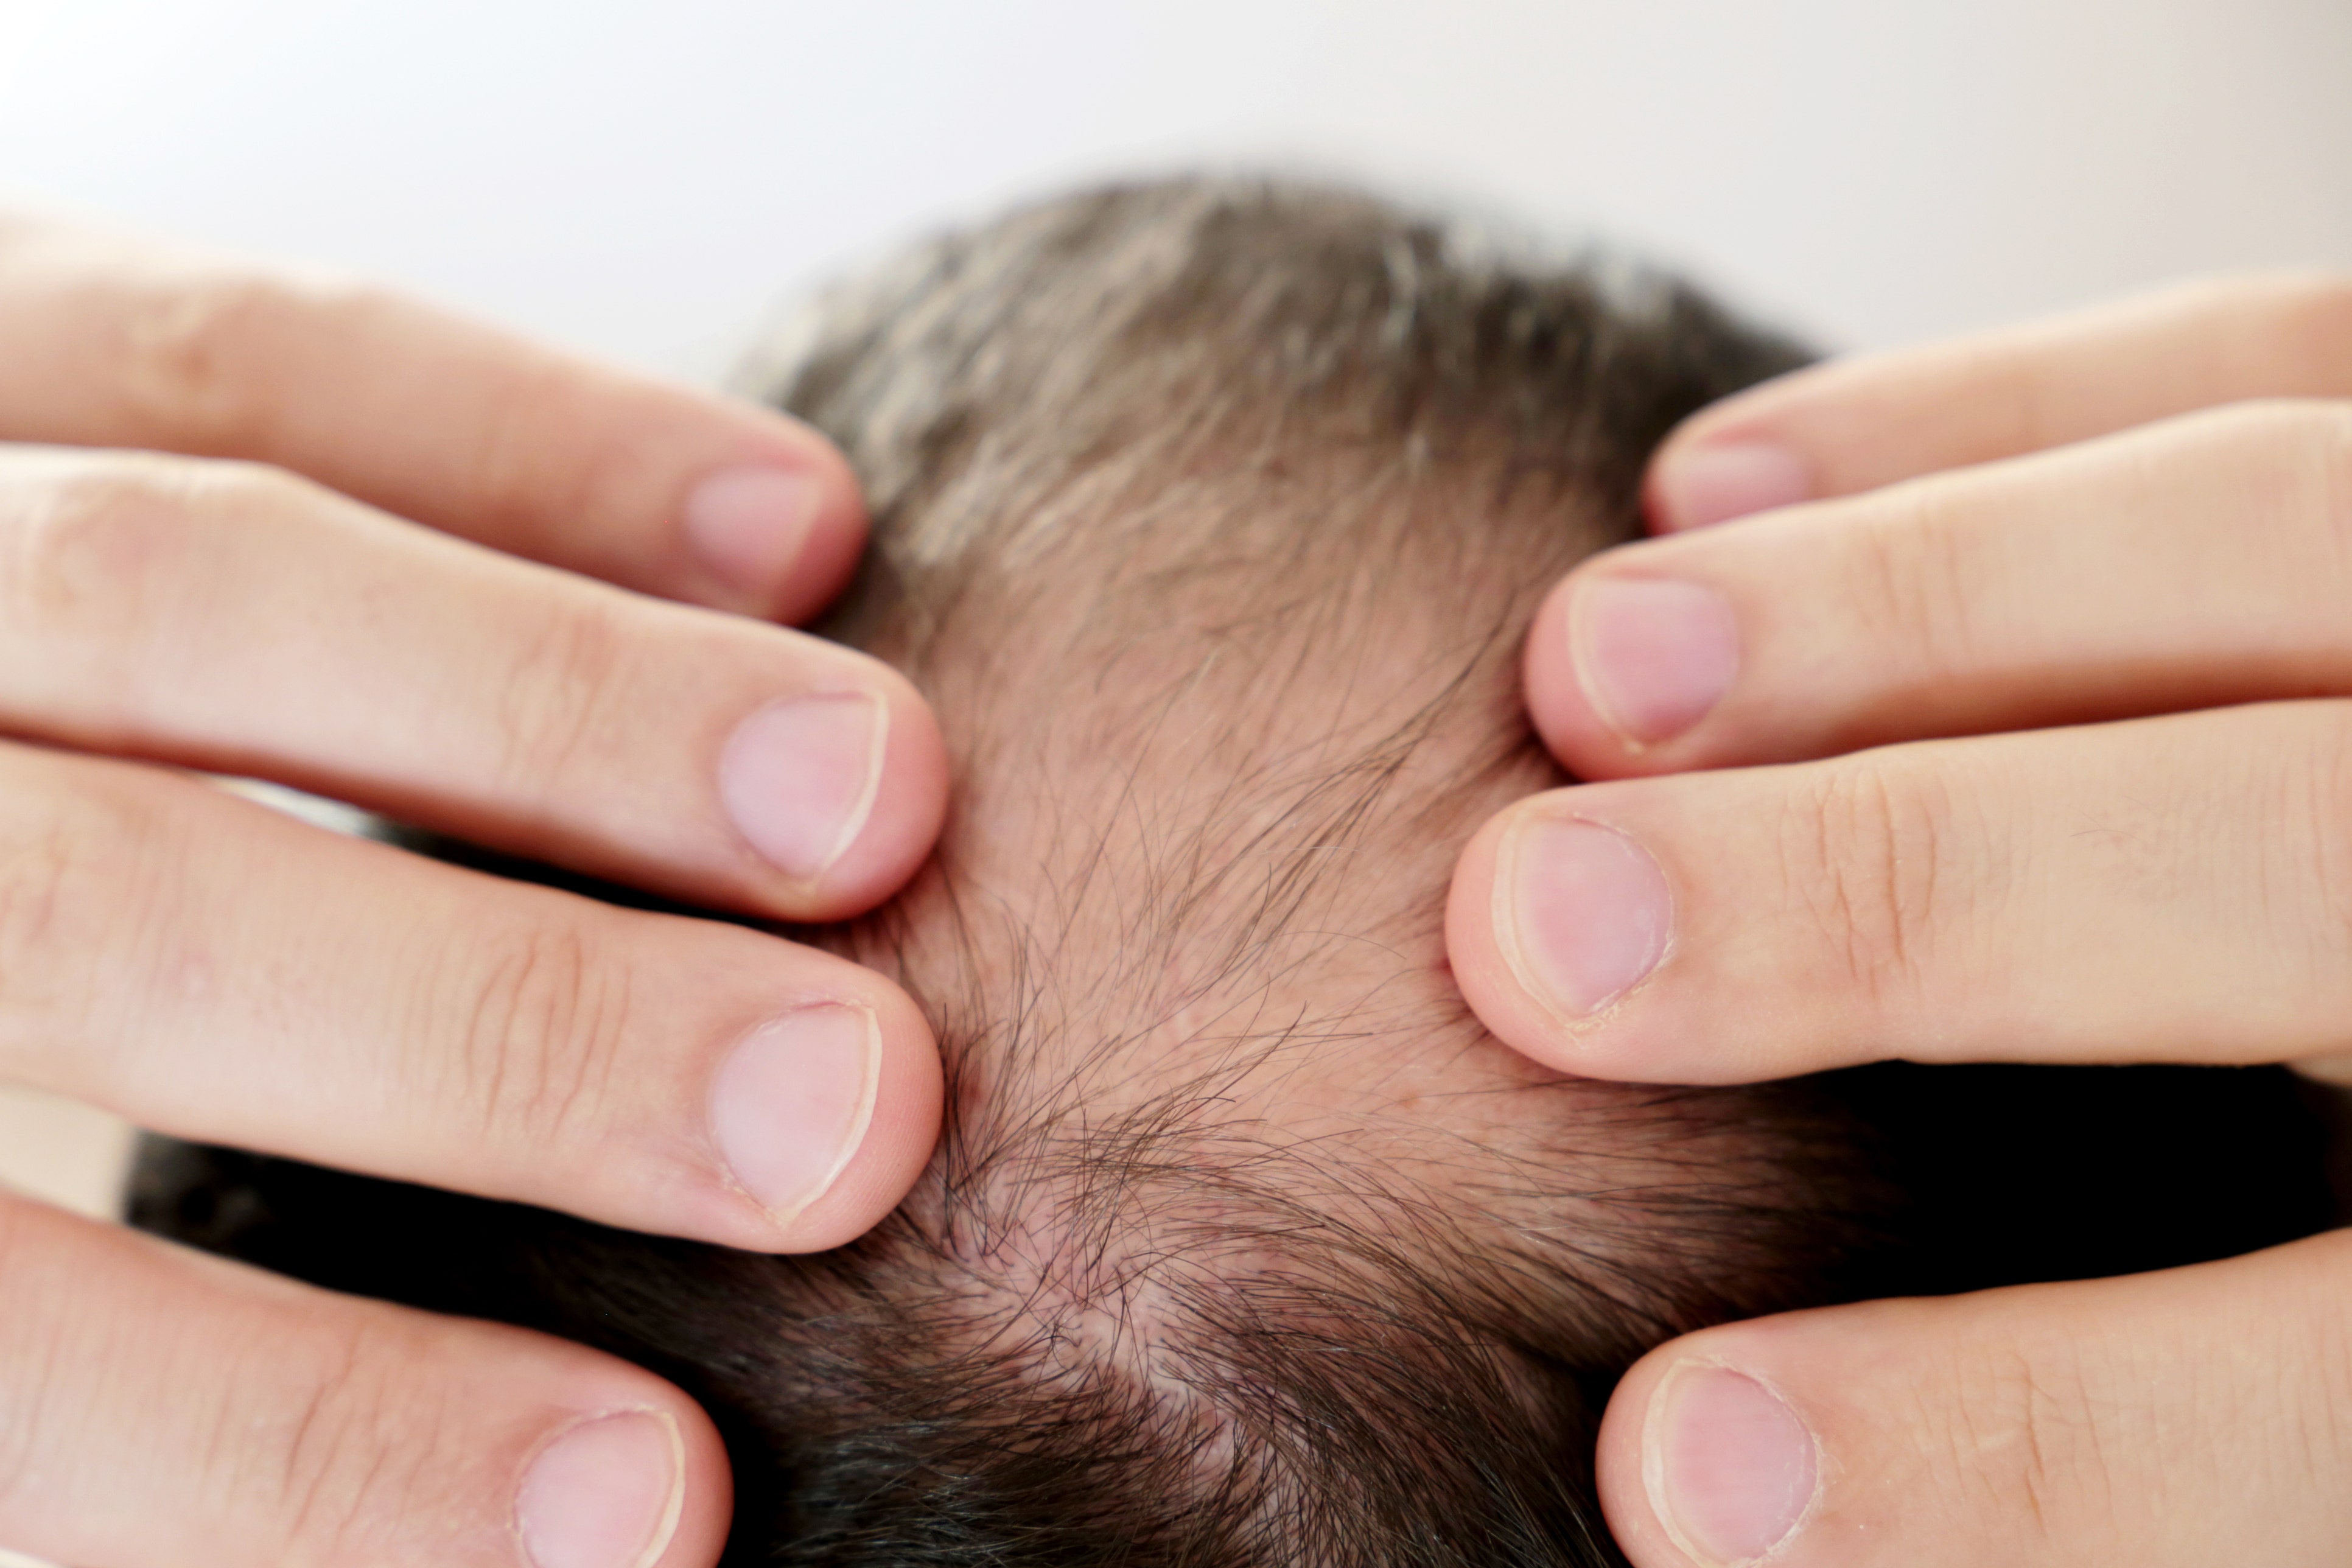 Why can chronic stress result in hair loss? New research provides clues